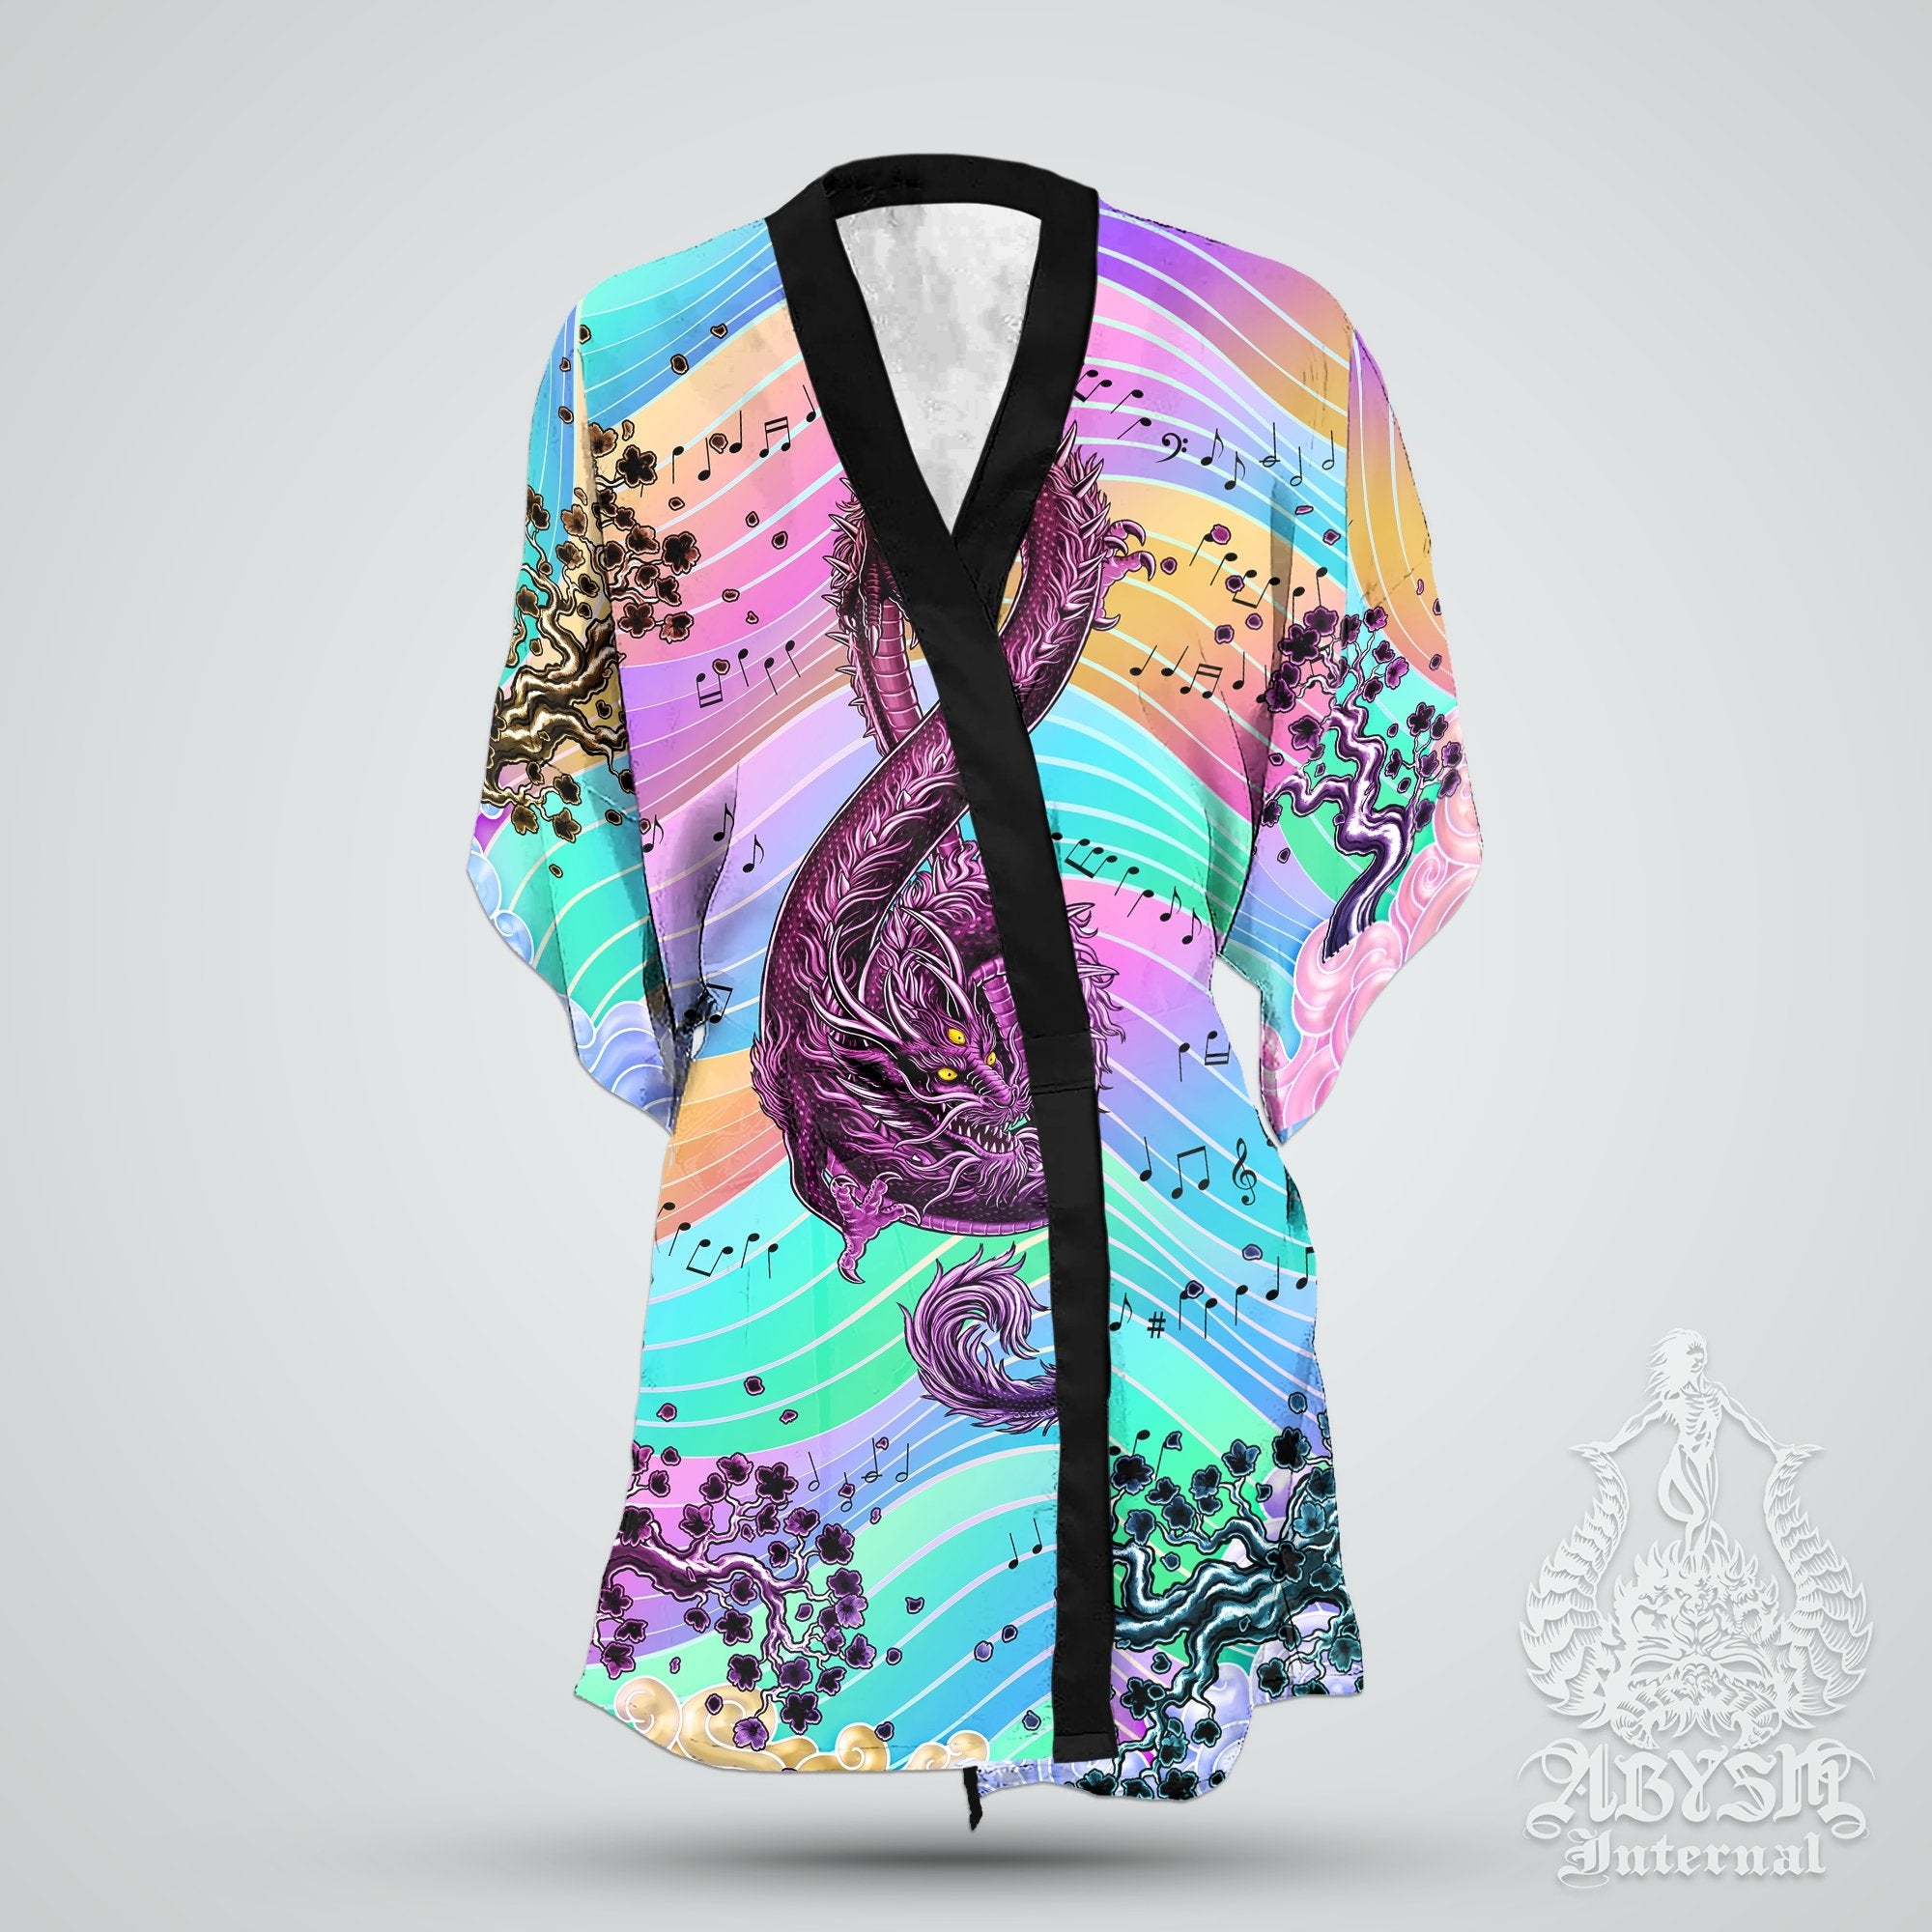 Music Cover Up, Beach Rave Outfit, Party Kimono, Summer Festival Robe, Aesthetic Indie and Alternative Clothing, Unisex - Dragon, Pastel Punk Black I - Abysm Internal